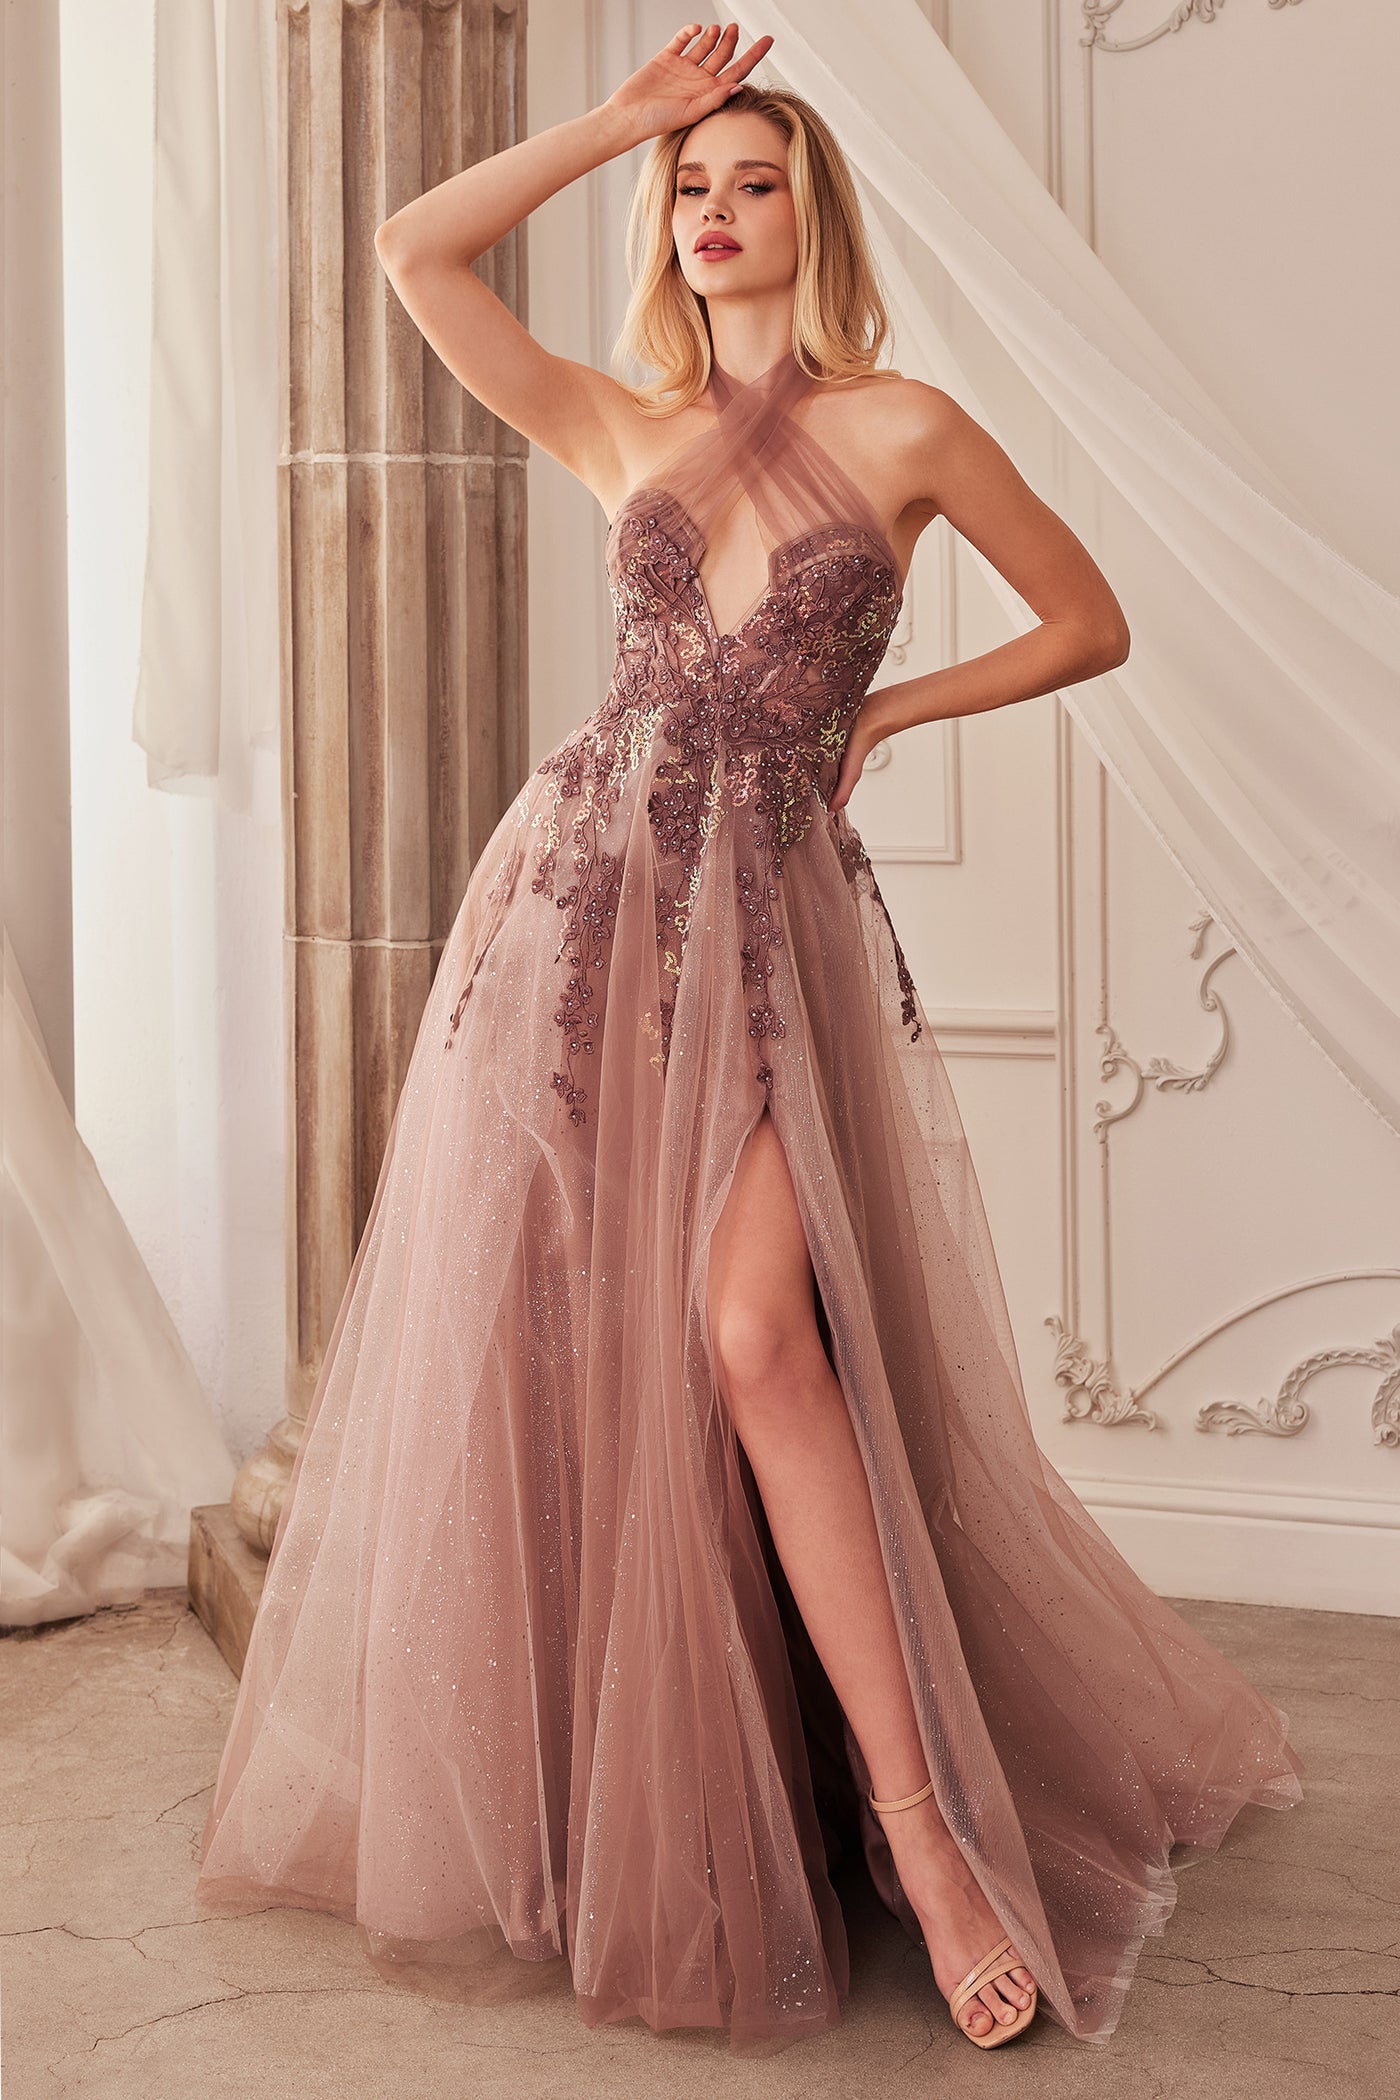 Andrea and Leo A1236 - Embellished Halter Gown